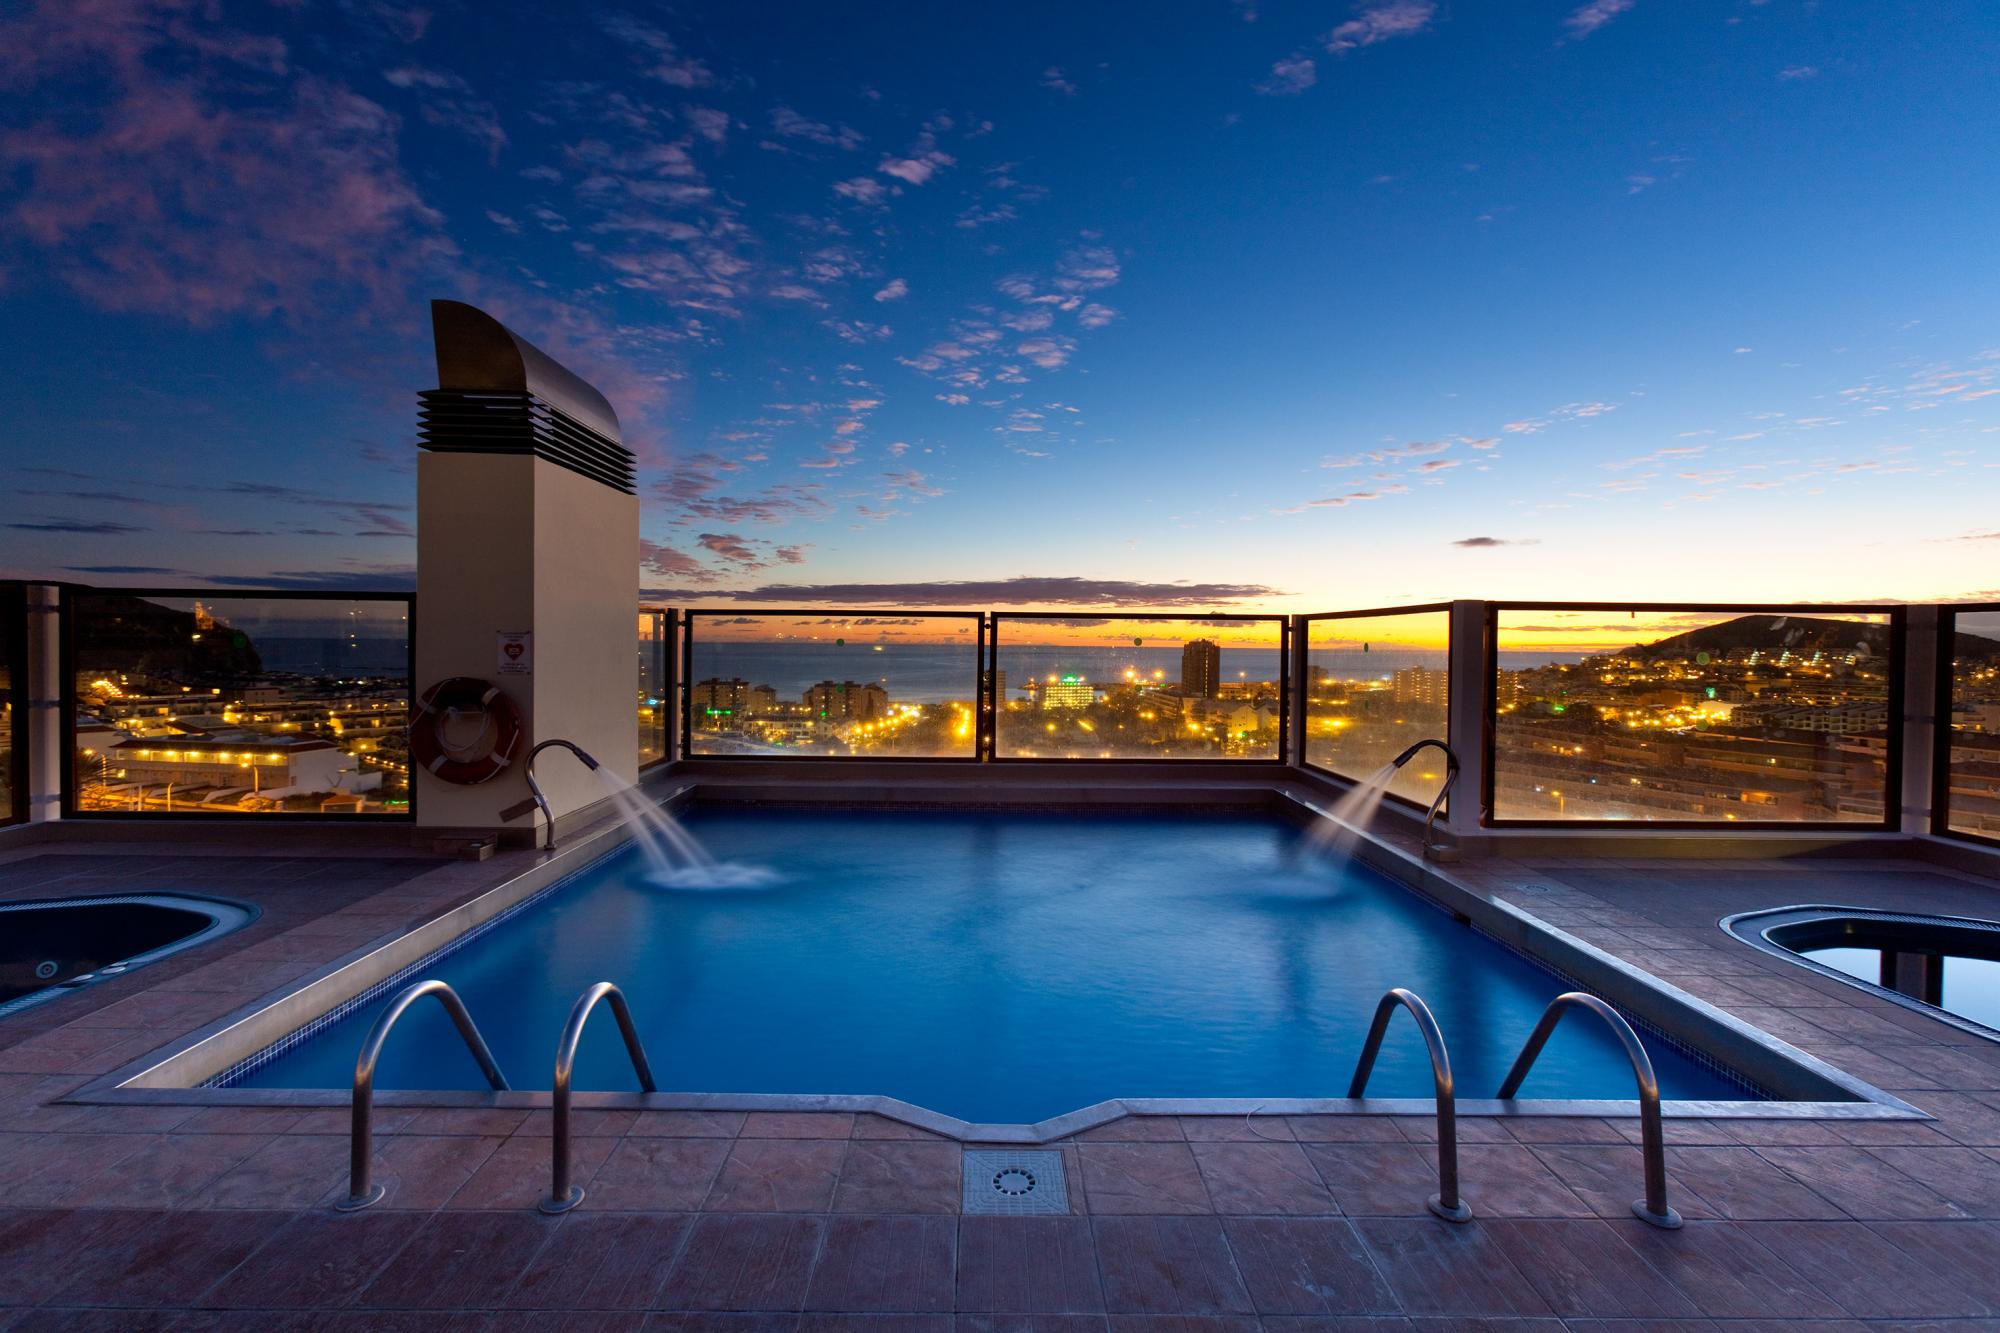 View Paradise Park Hotel's impressive rooftop pool situated in brilliant Tenerife.